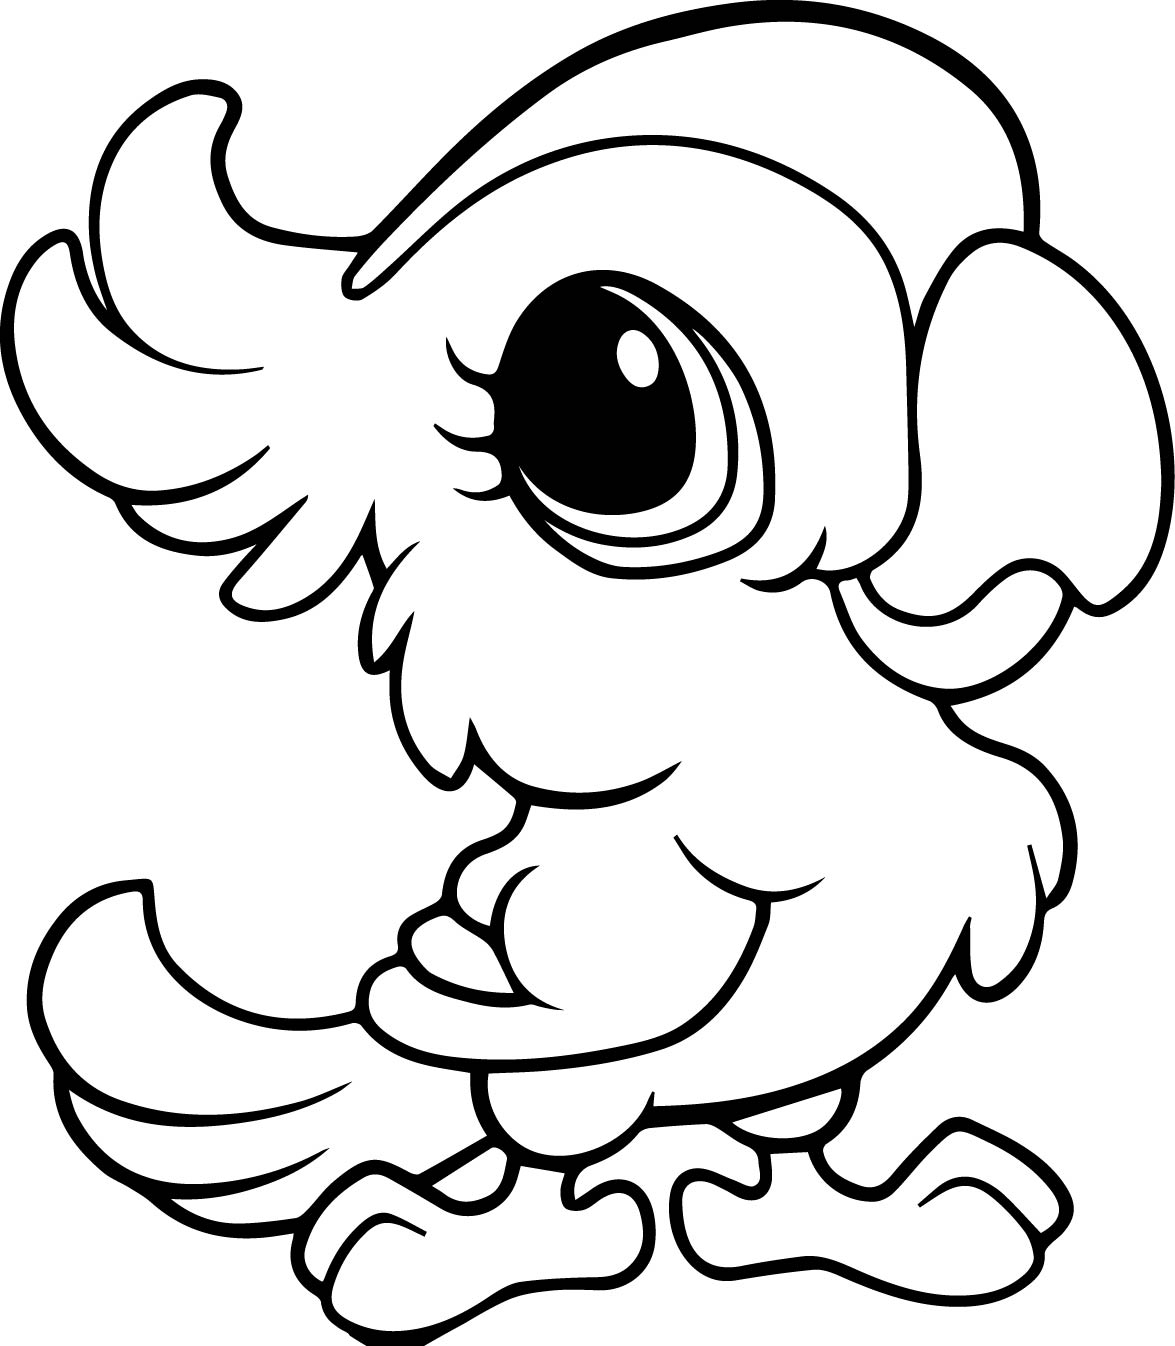 Animal Coloring Pages For Teens At Getcolorings.com | Free Printable